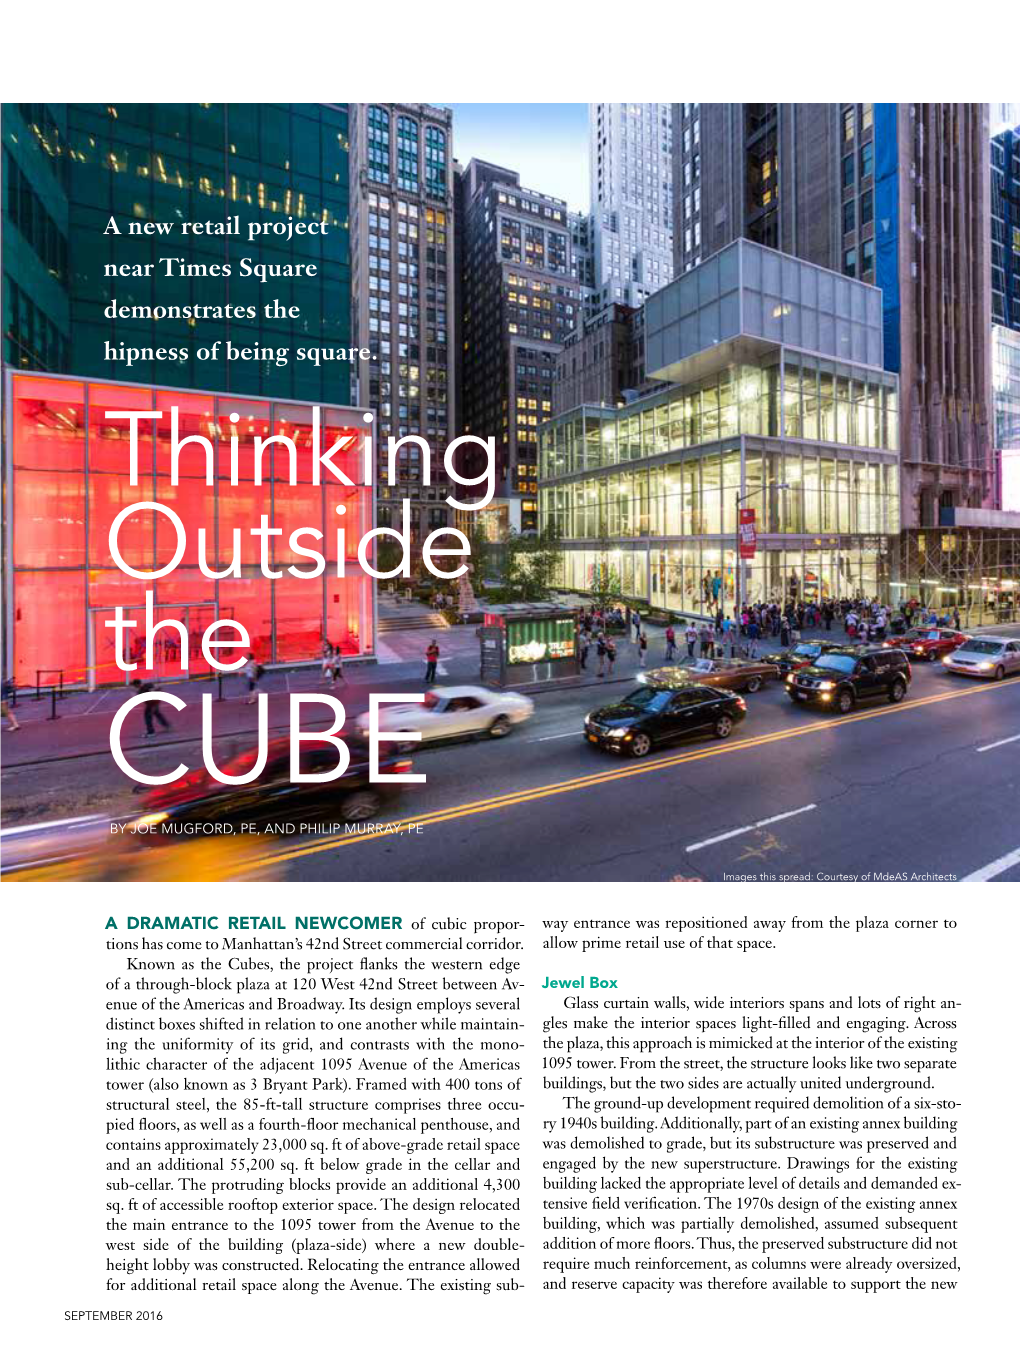 Thinking Outside the CUBE by JOE MUGFORD, PE, and PHILIP MURRAY, PE